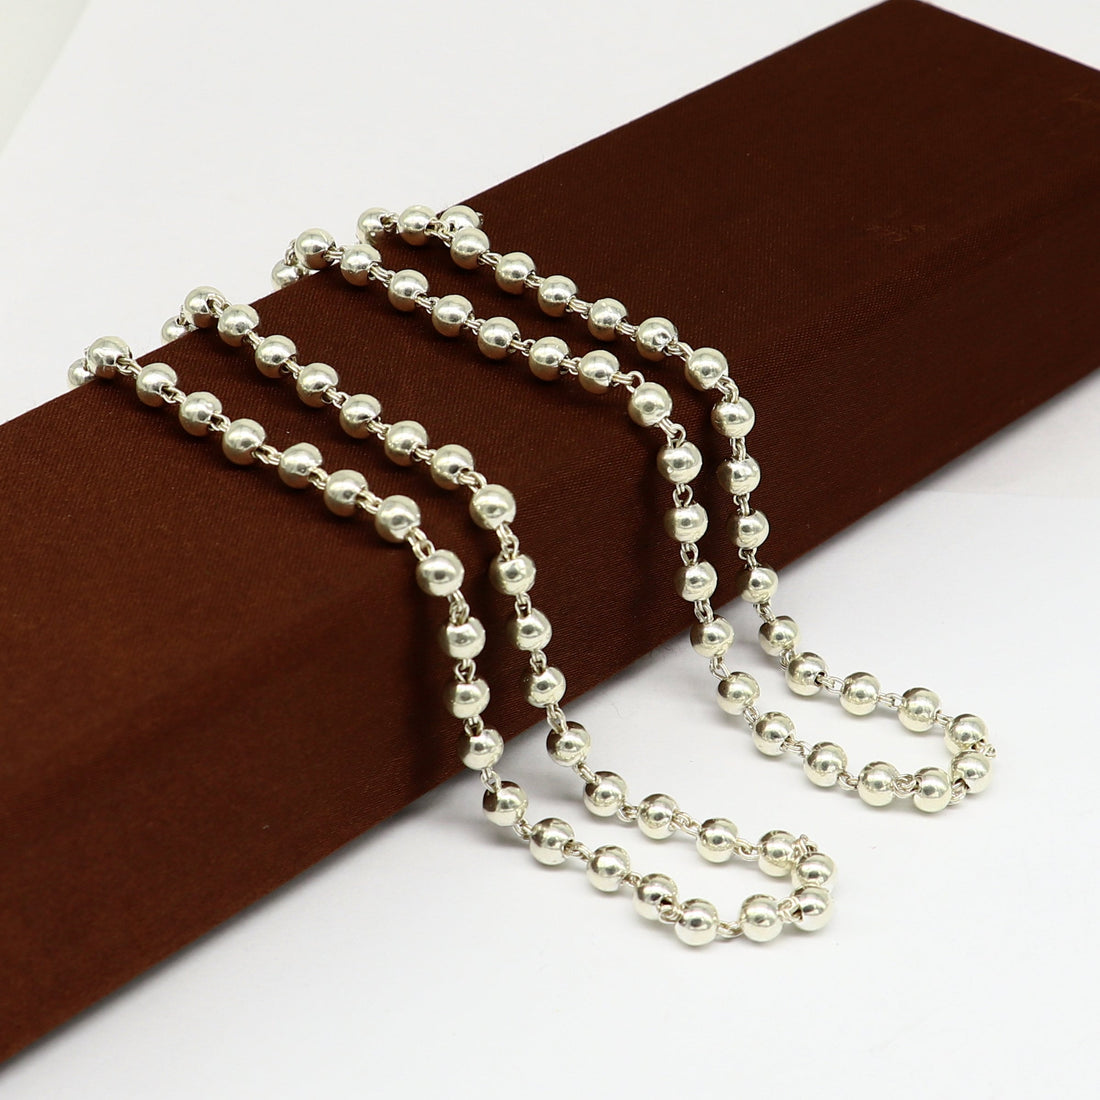 925 sterling silver fabulous plain solid beads chain japp mala 108 beads japp chain fabulous chanting necklace stylish jewelry ch109 - TRIBAL ORNAMENTS